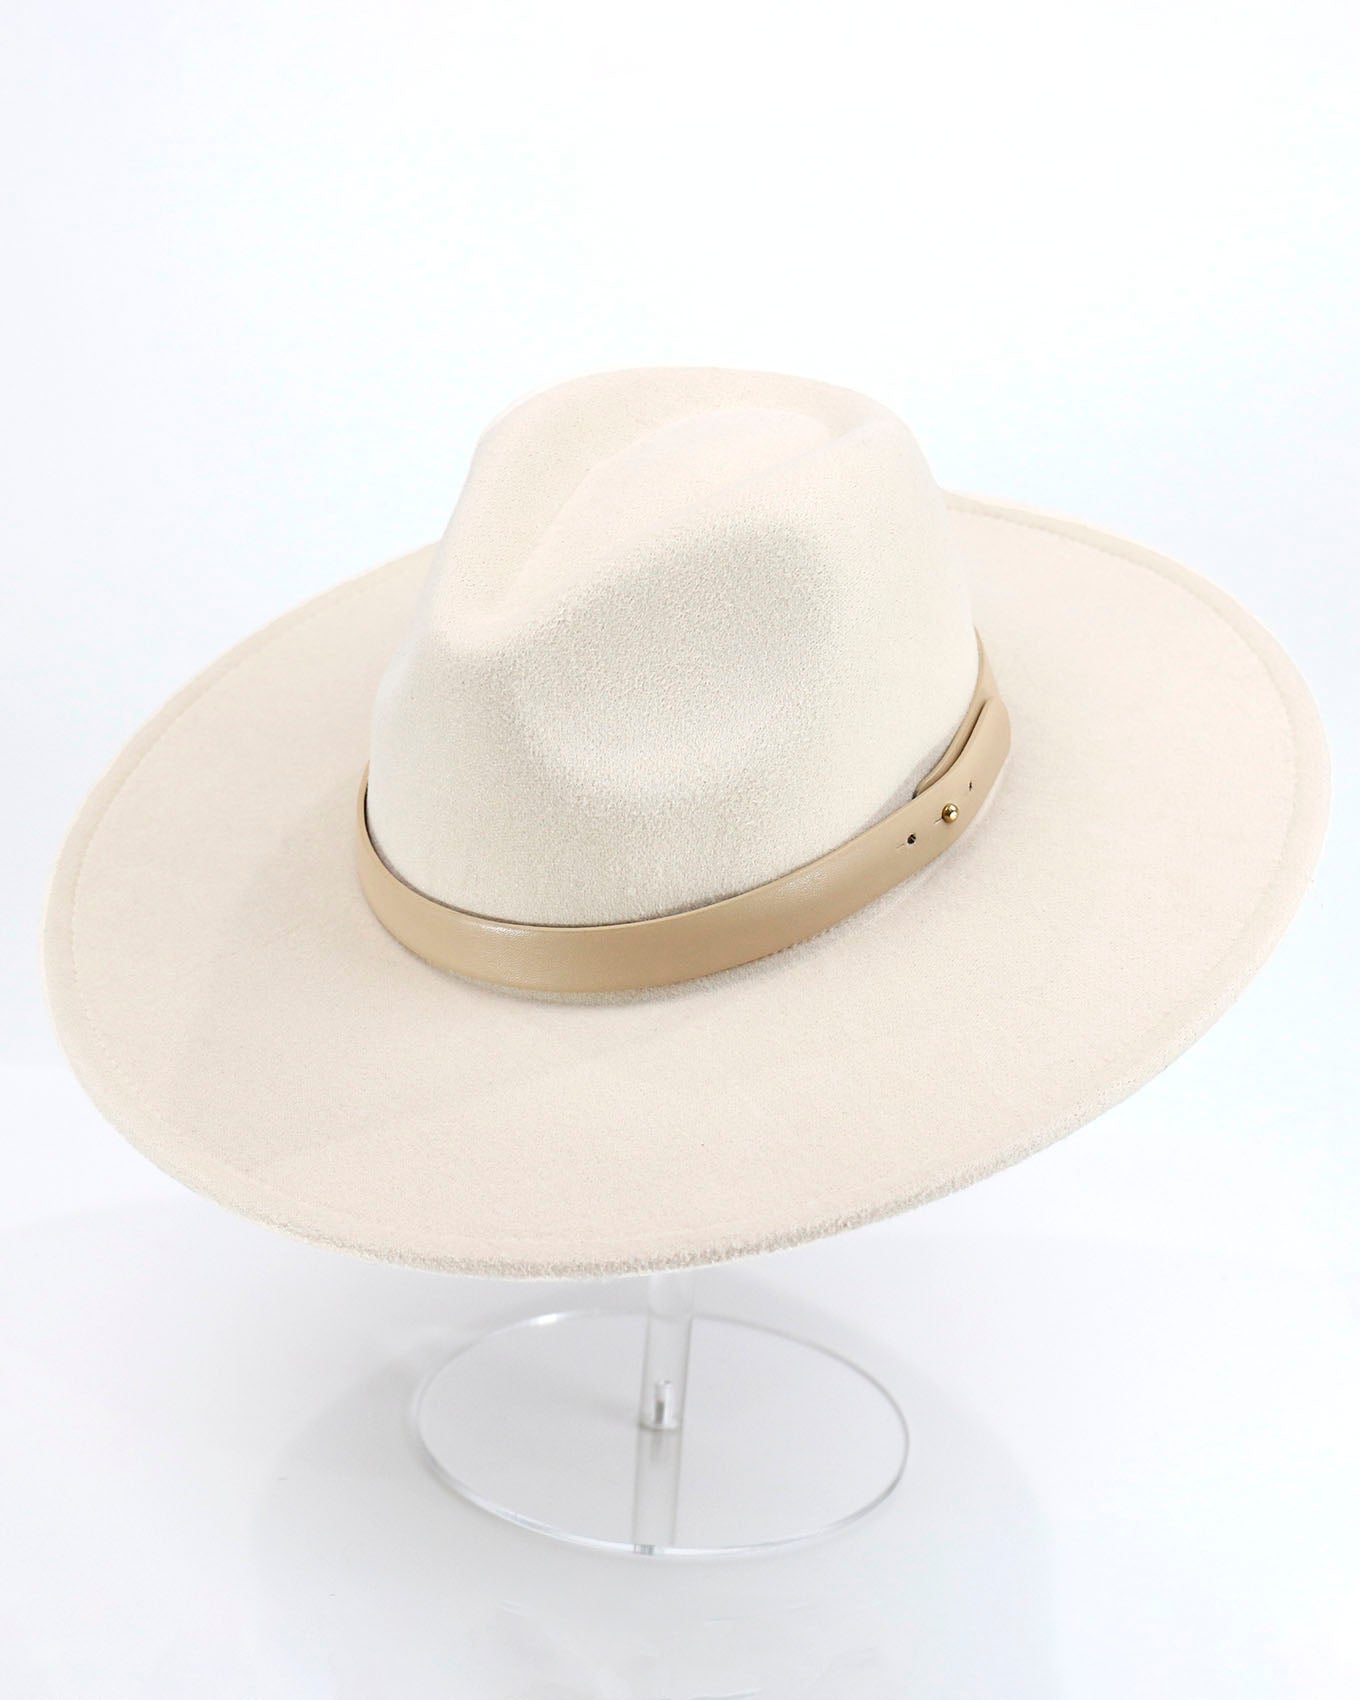 Wide Brim Felt Hat in Cream by Grace and Lace